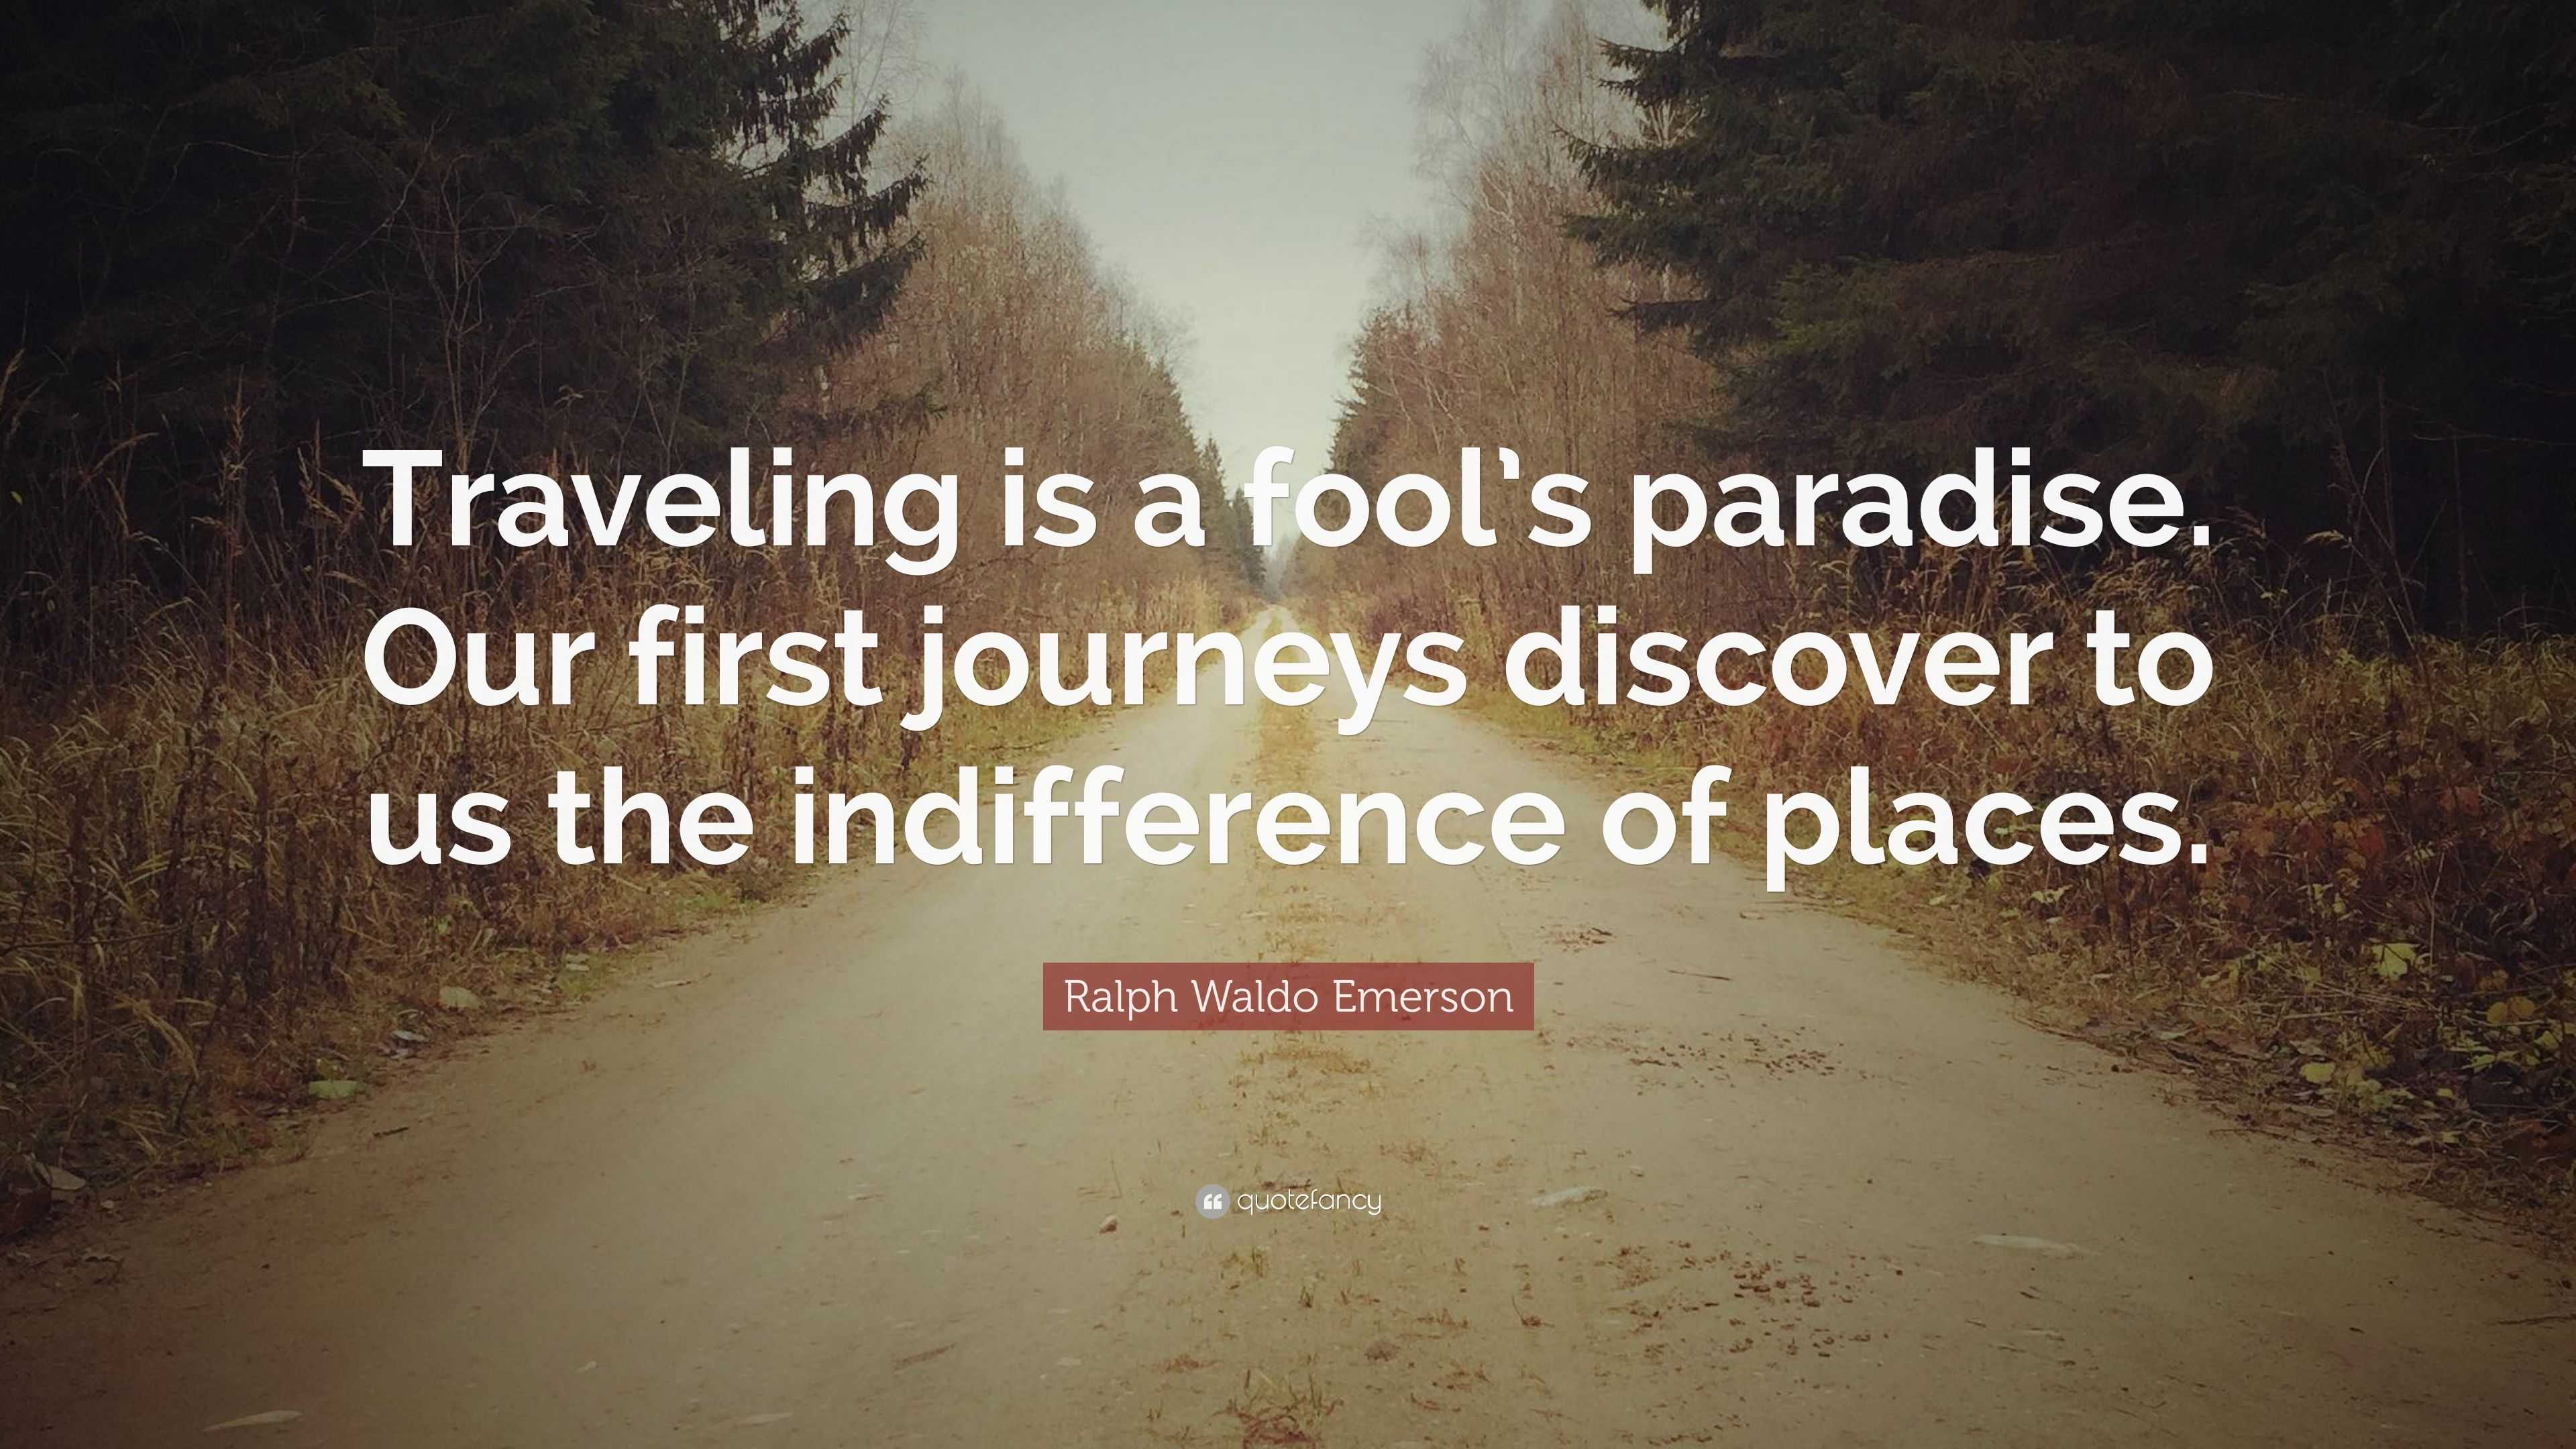 travel is a fool's paradise